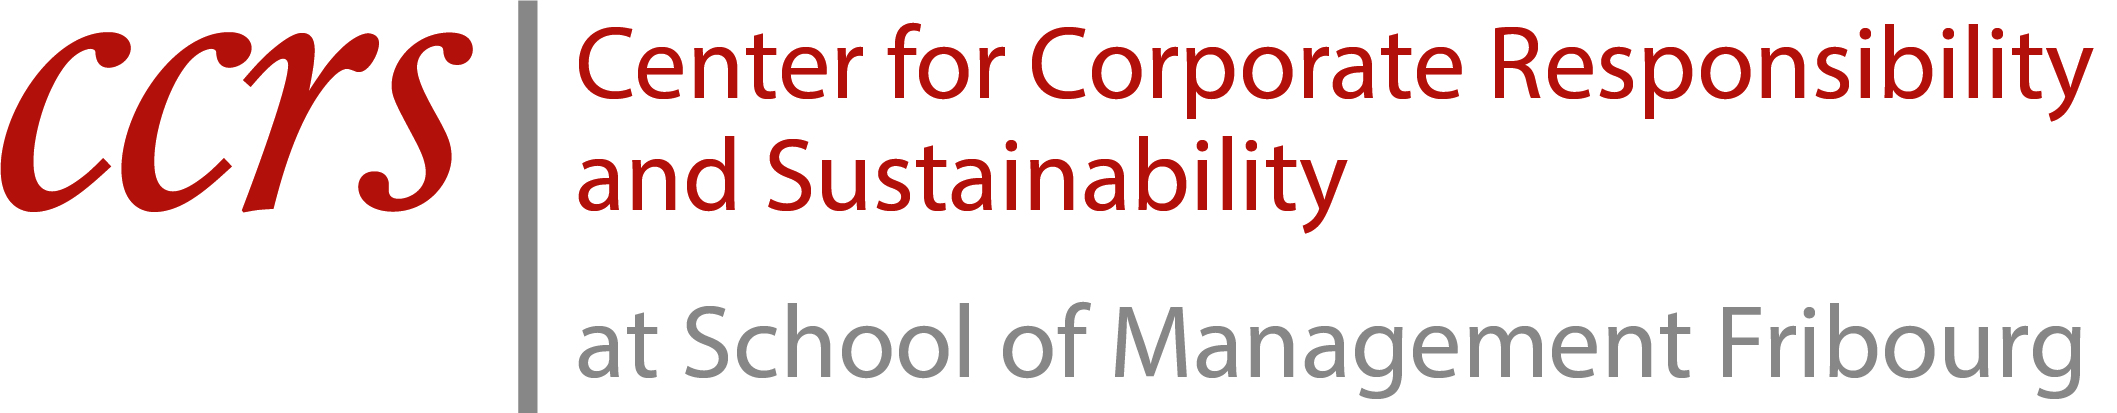 Logo Center for Corporate Responsibilty and sustainability at School of Management Fribourg